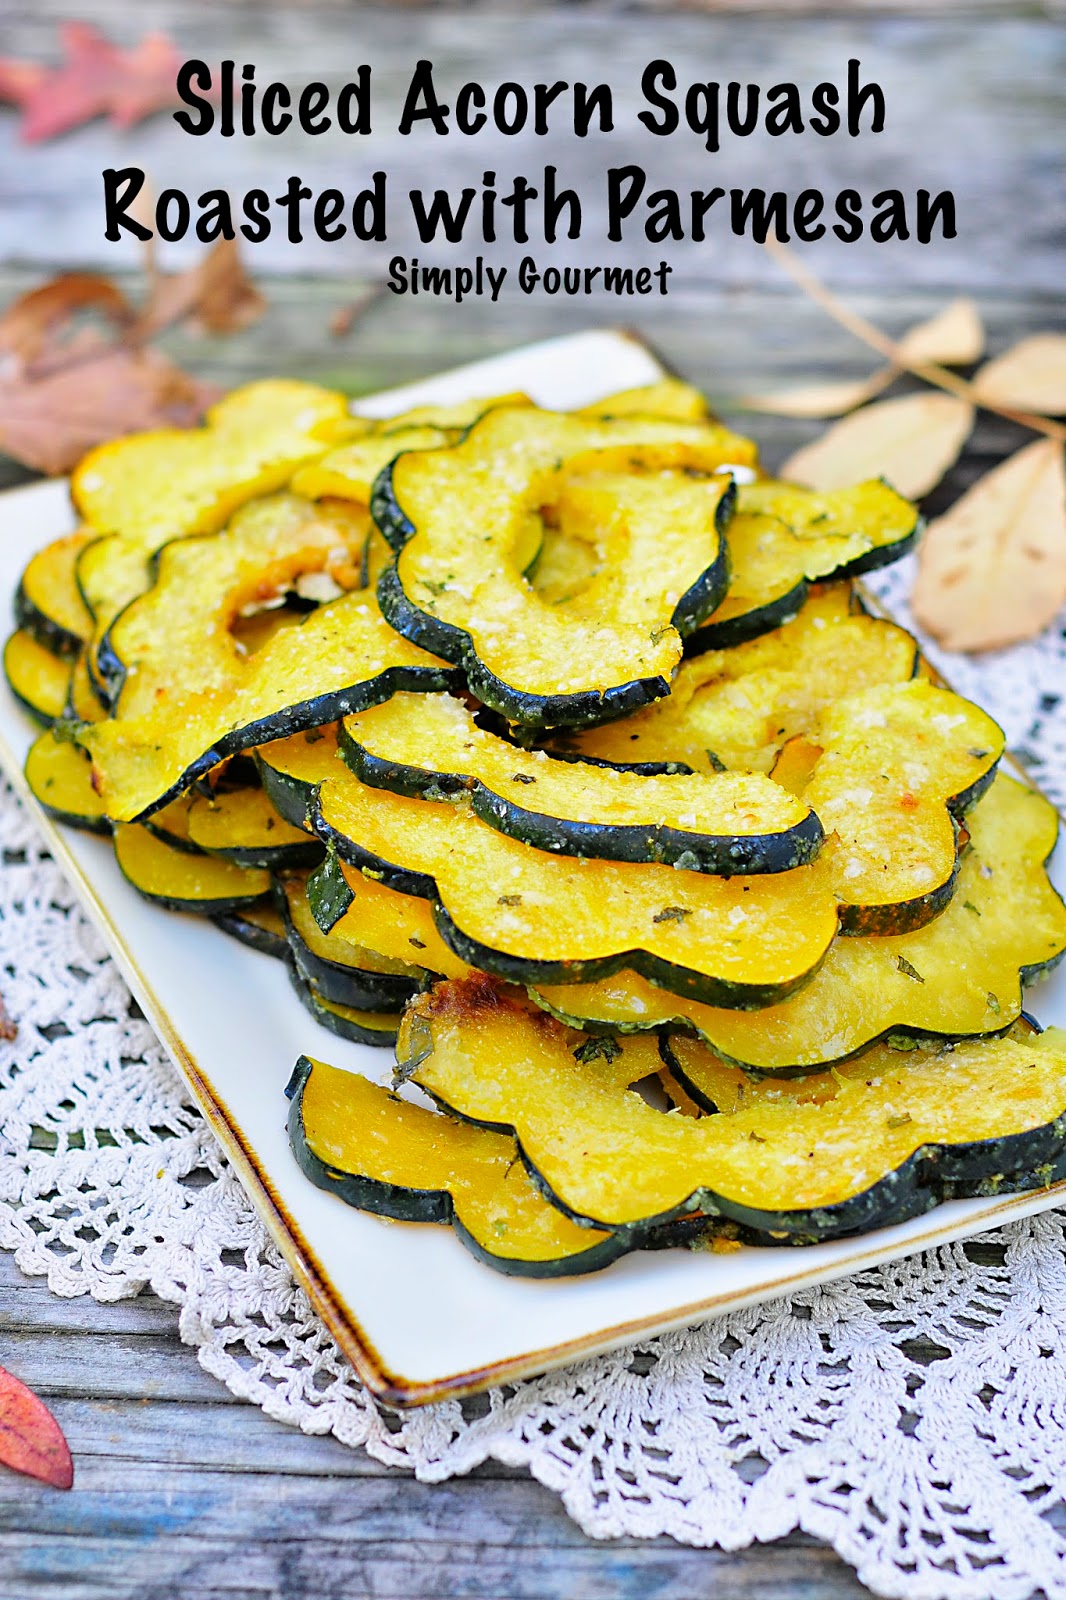 Simply Gourmet: Sliced Acorn Squash with Parmesan Cheese